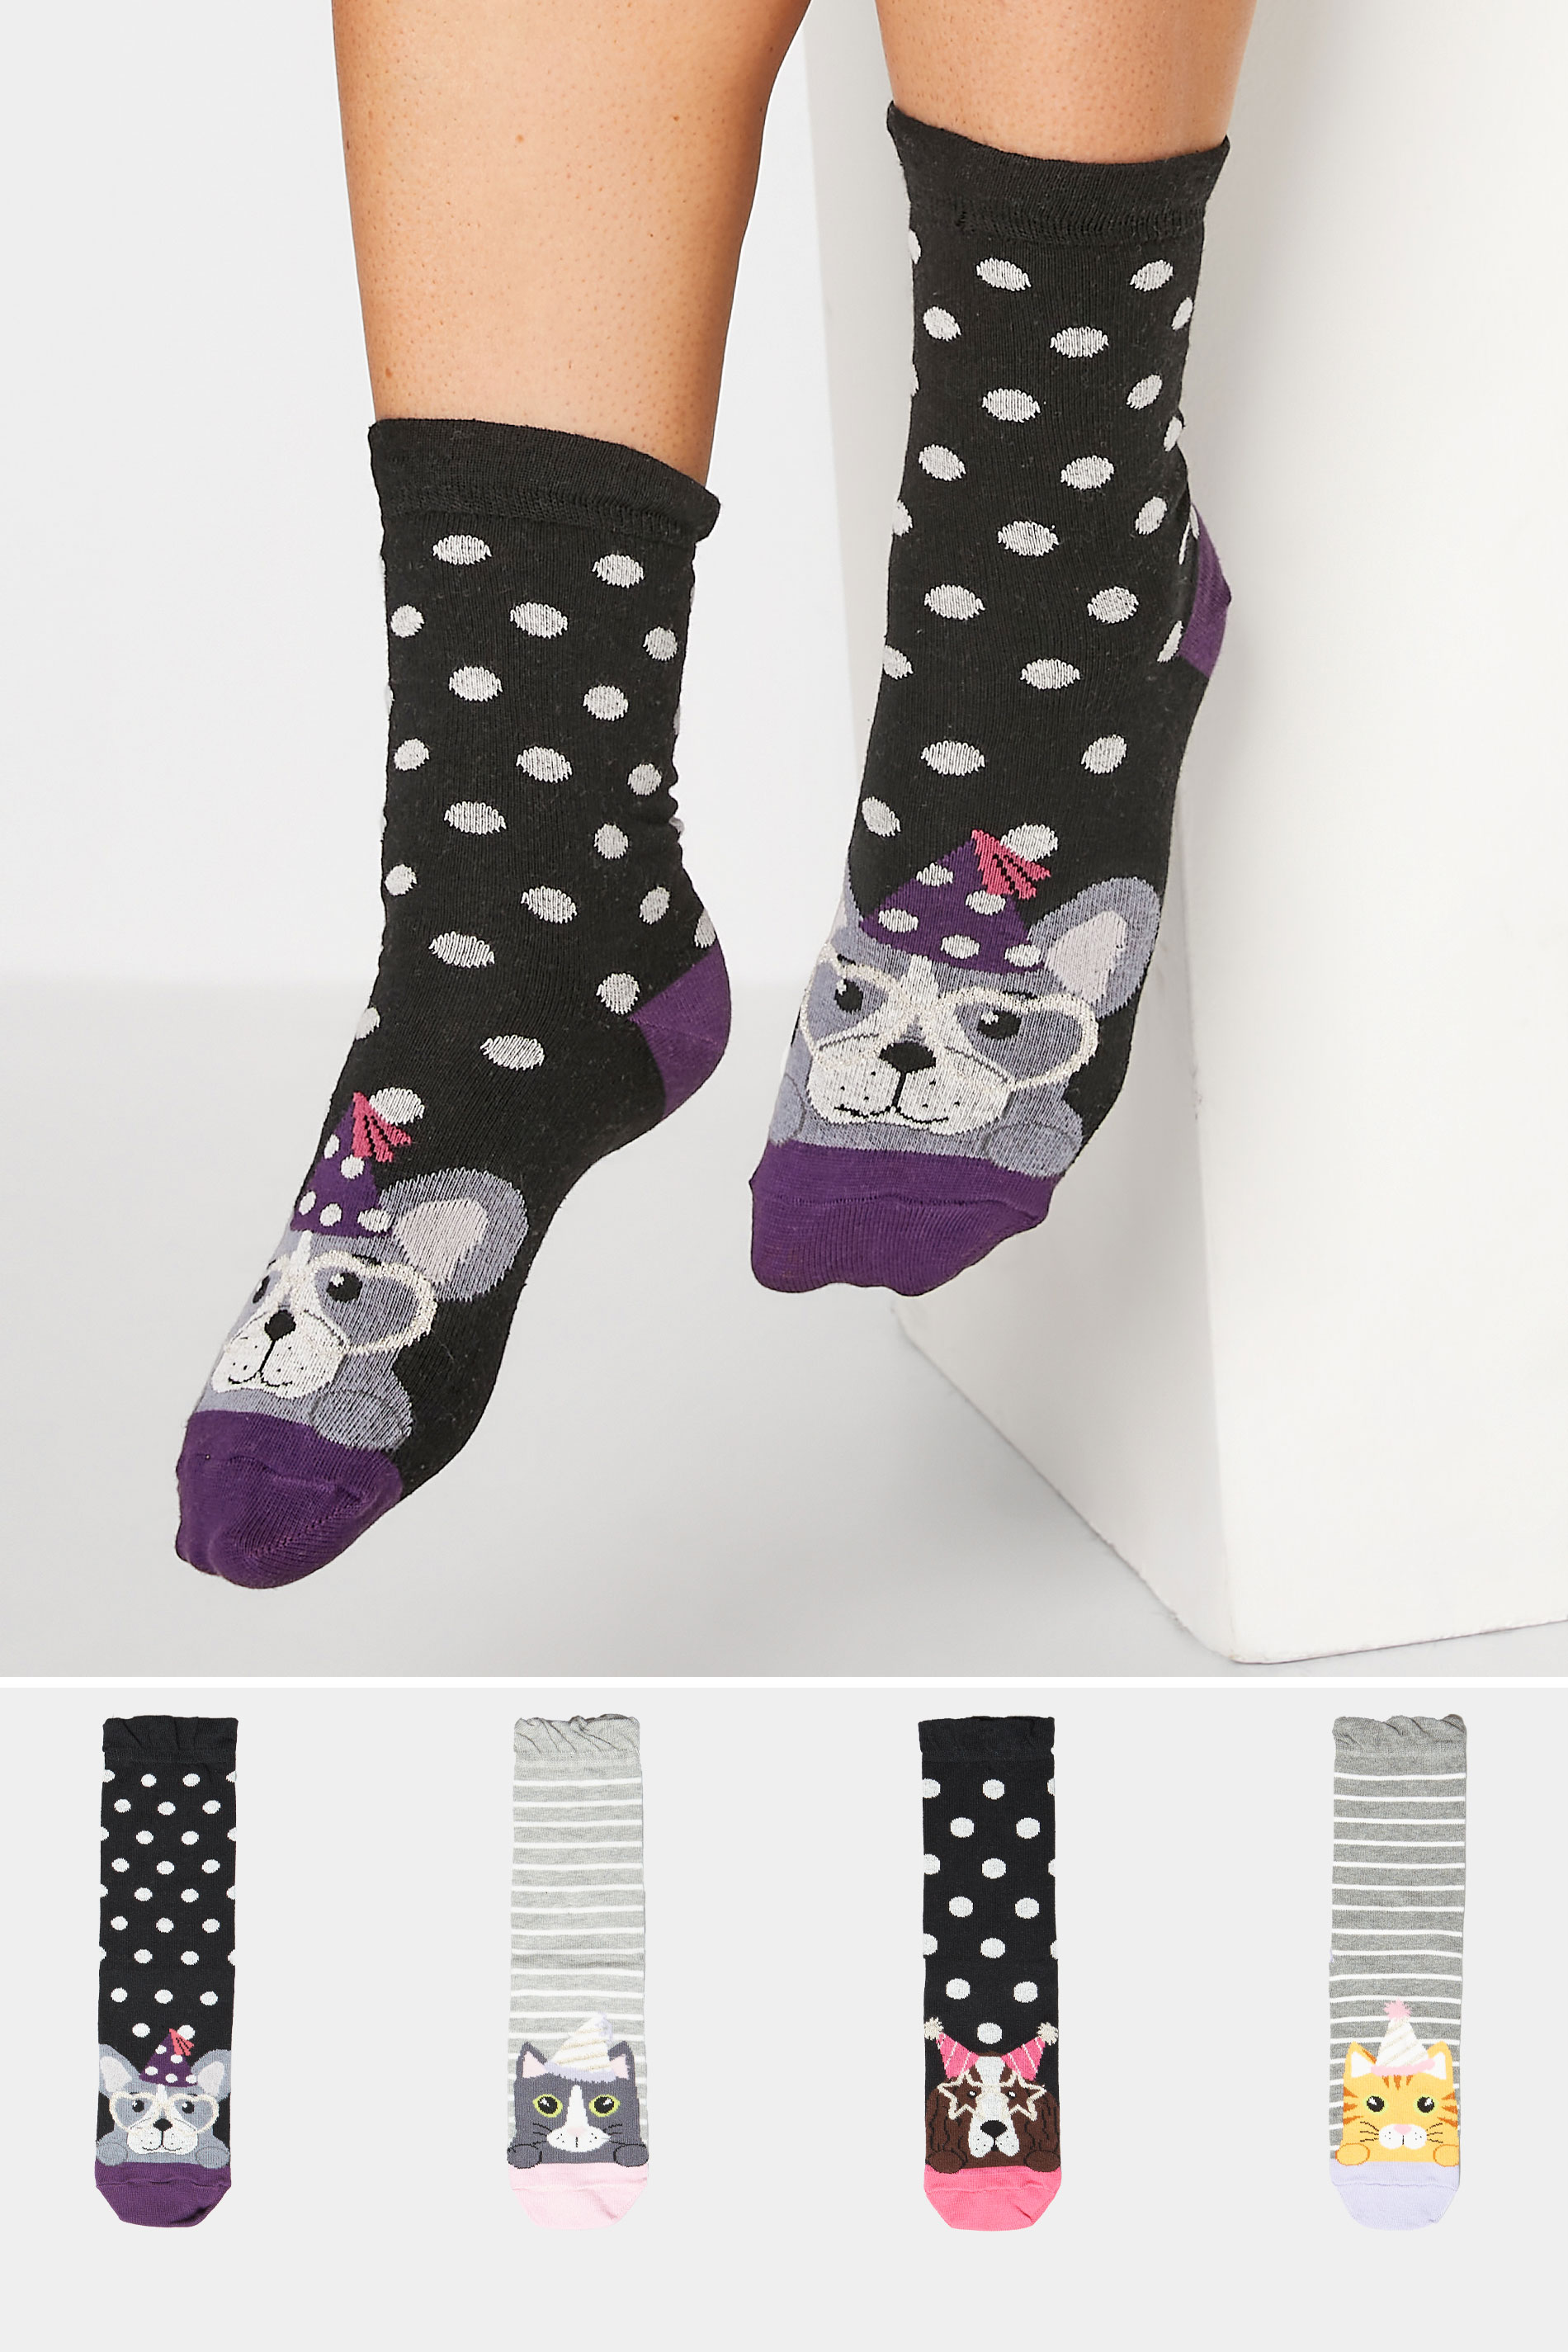 4 PACK Black Dogs & Cats Party Socks | Yours Clothing  1